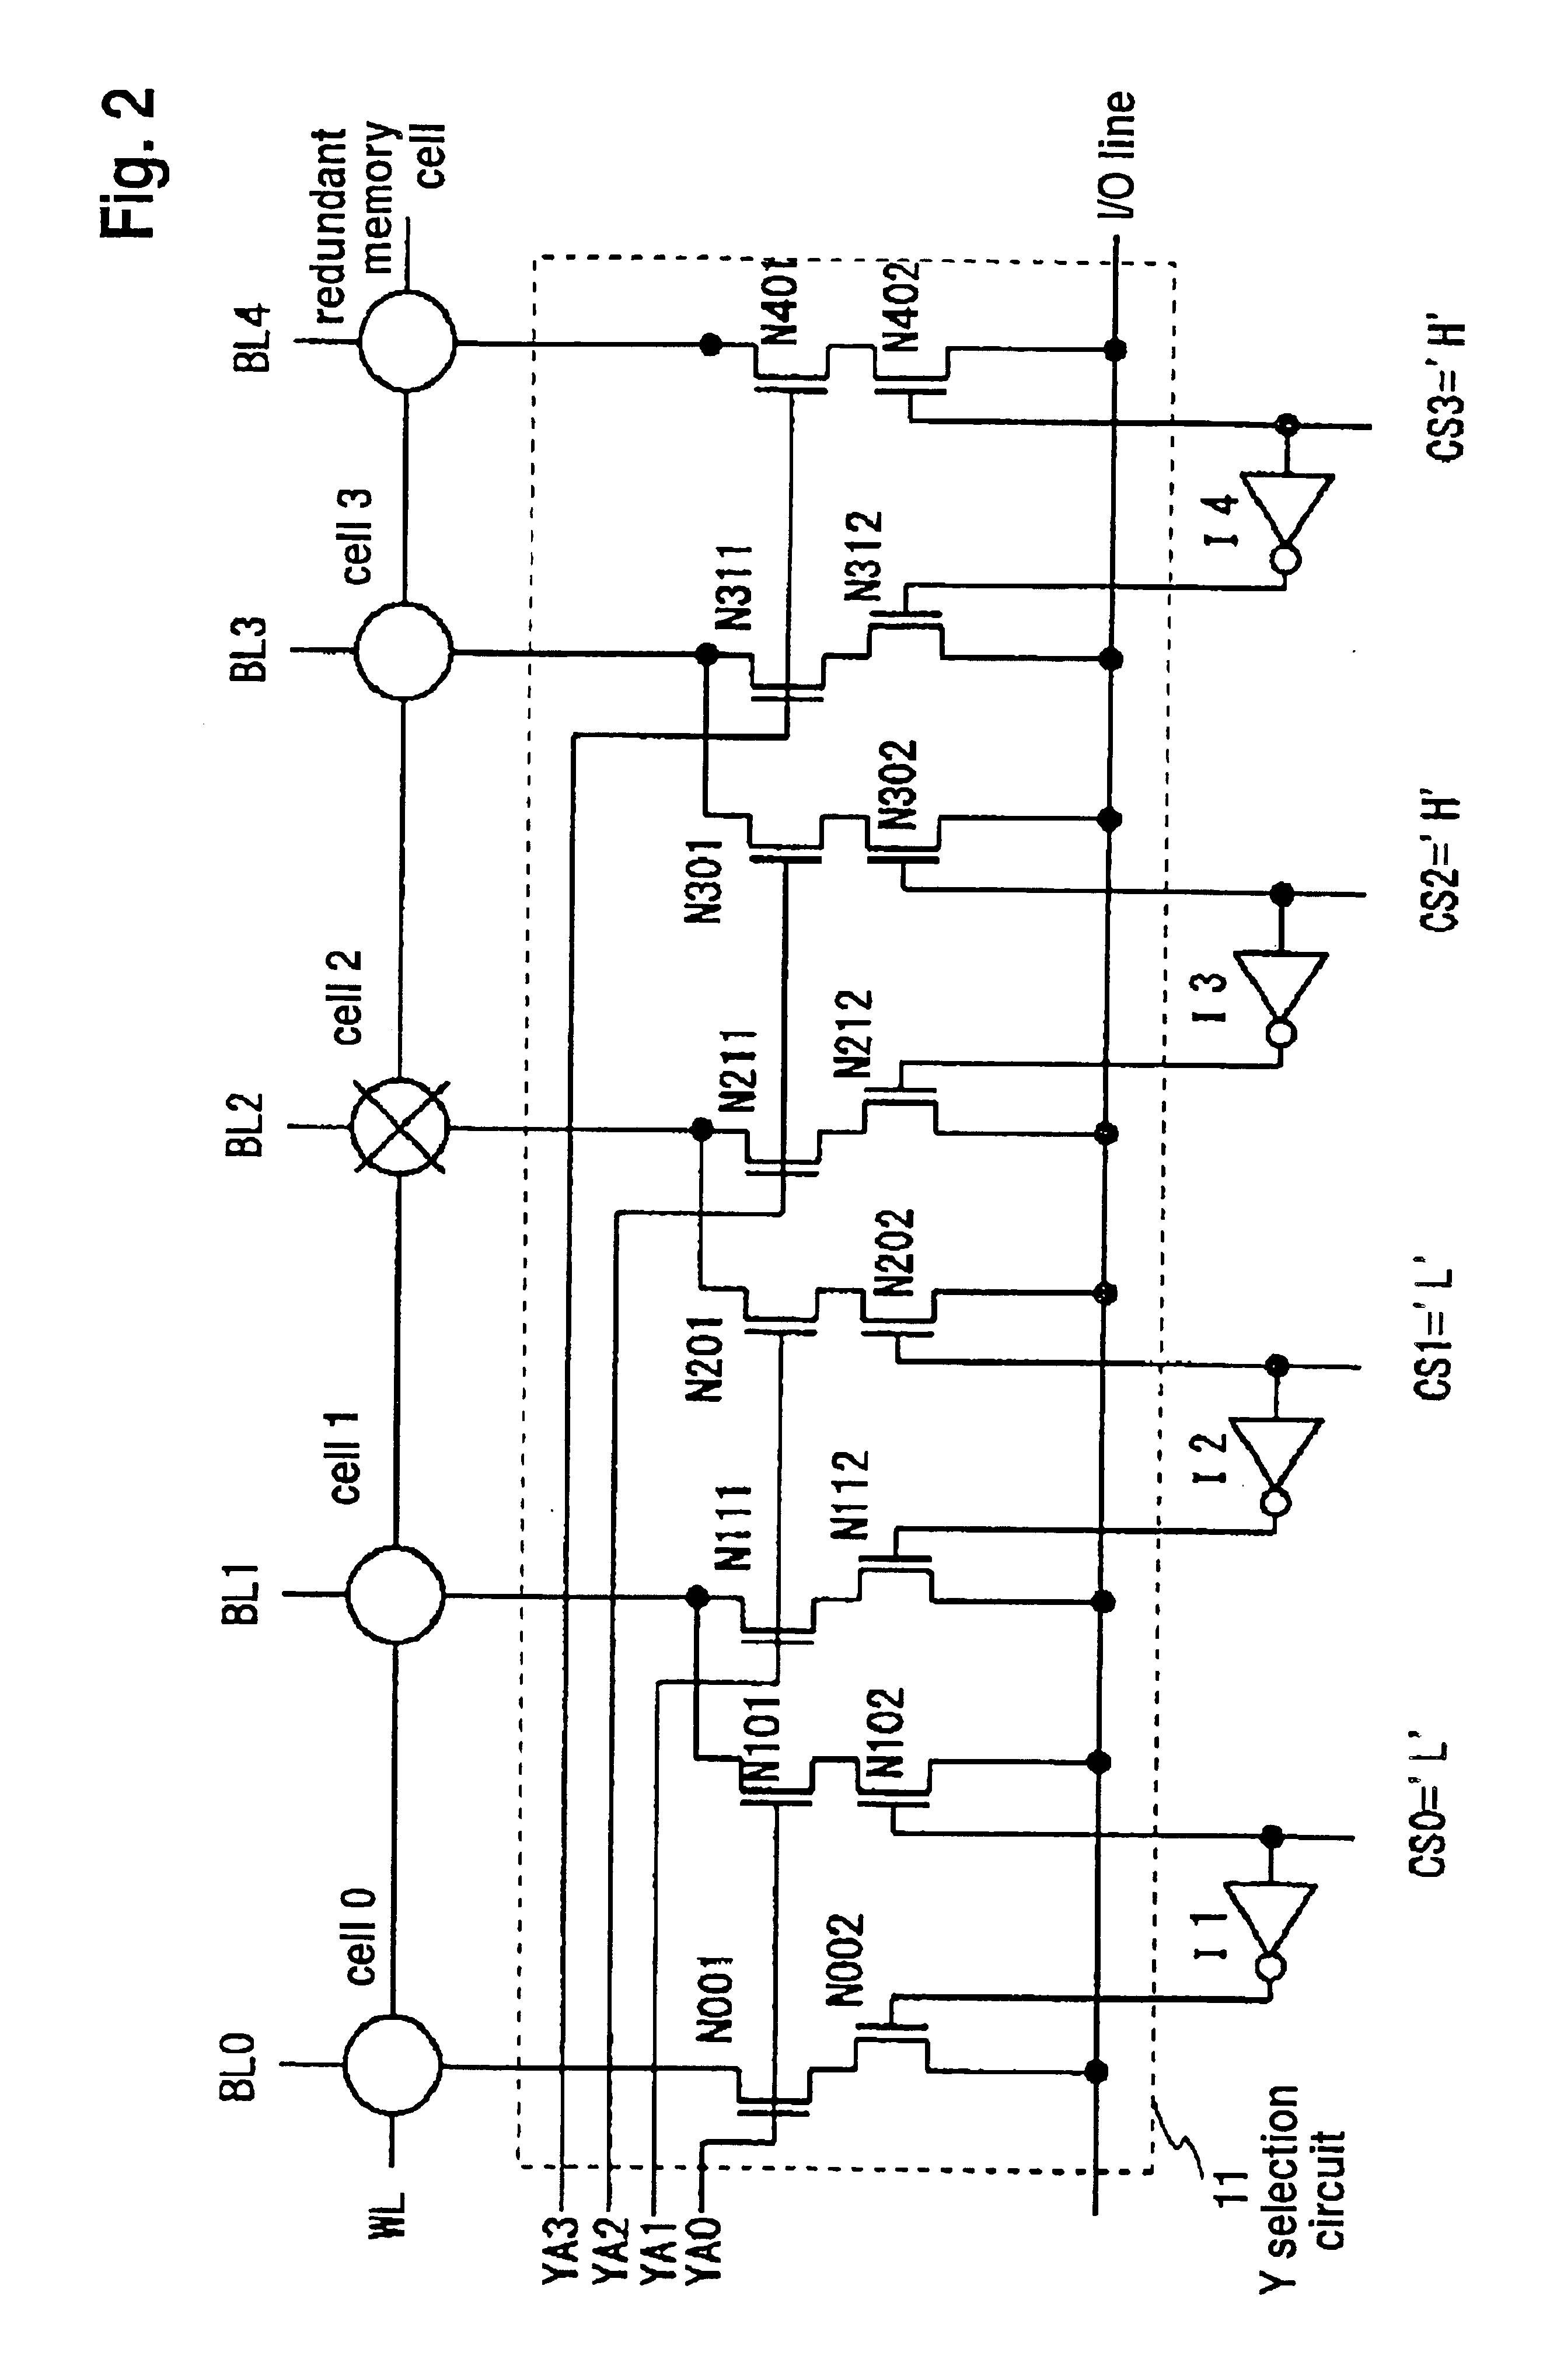 Semiconductor memory having a defective memory cell relieving circuit